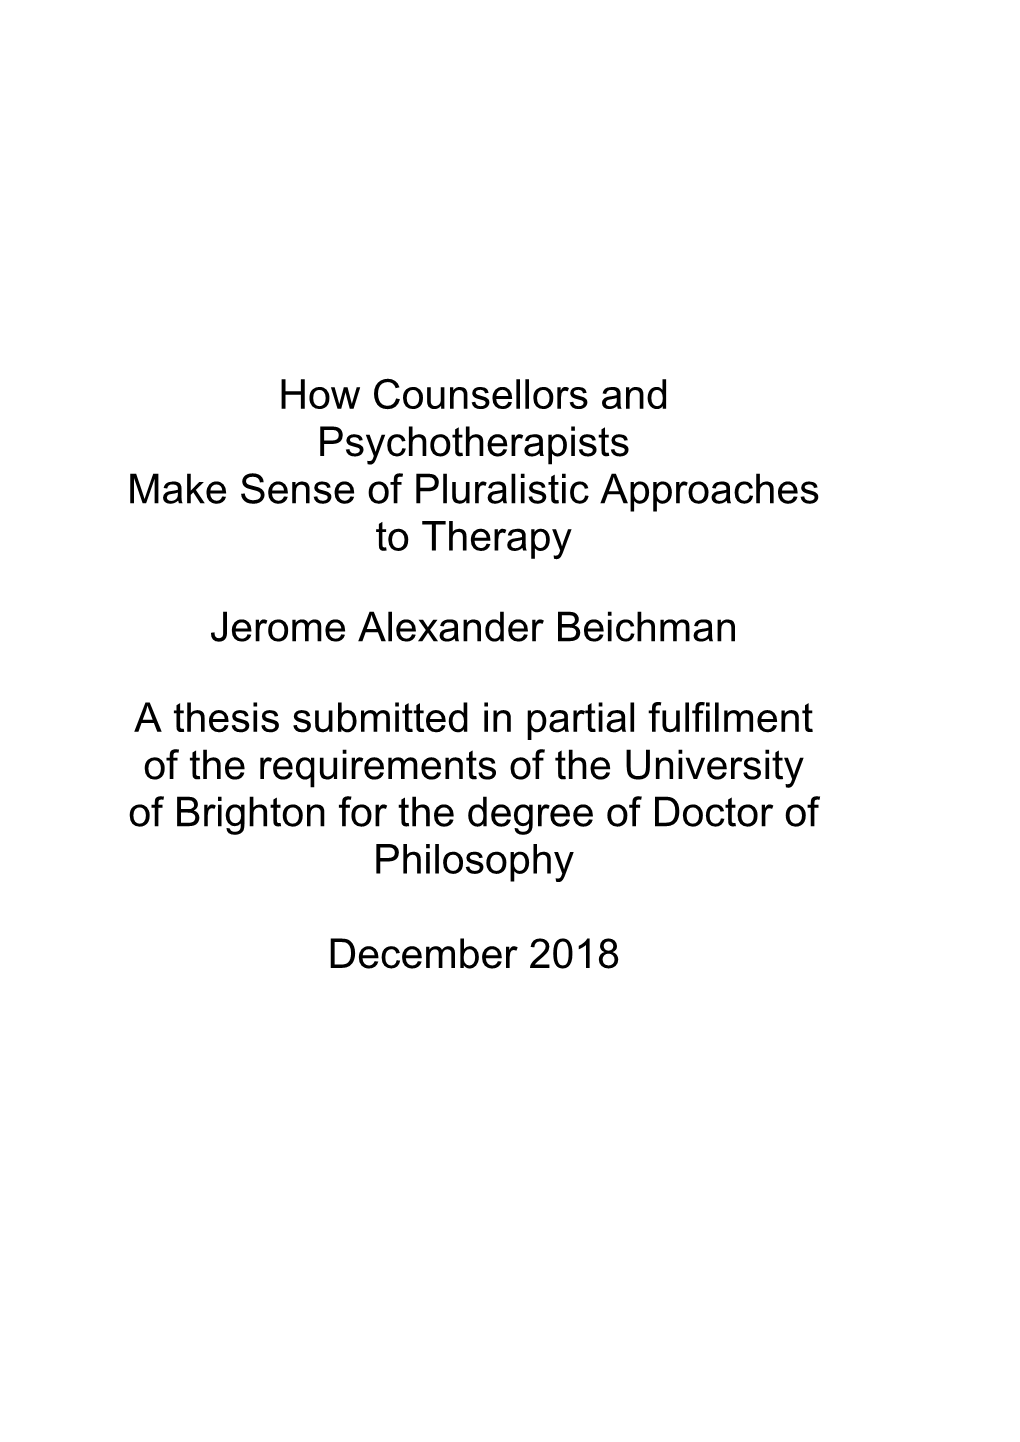 How Counsellors and Psychotherapists Make Sense of Pluralistic Approaches to Therapy